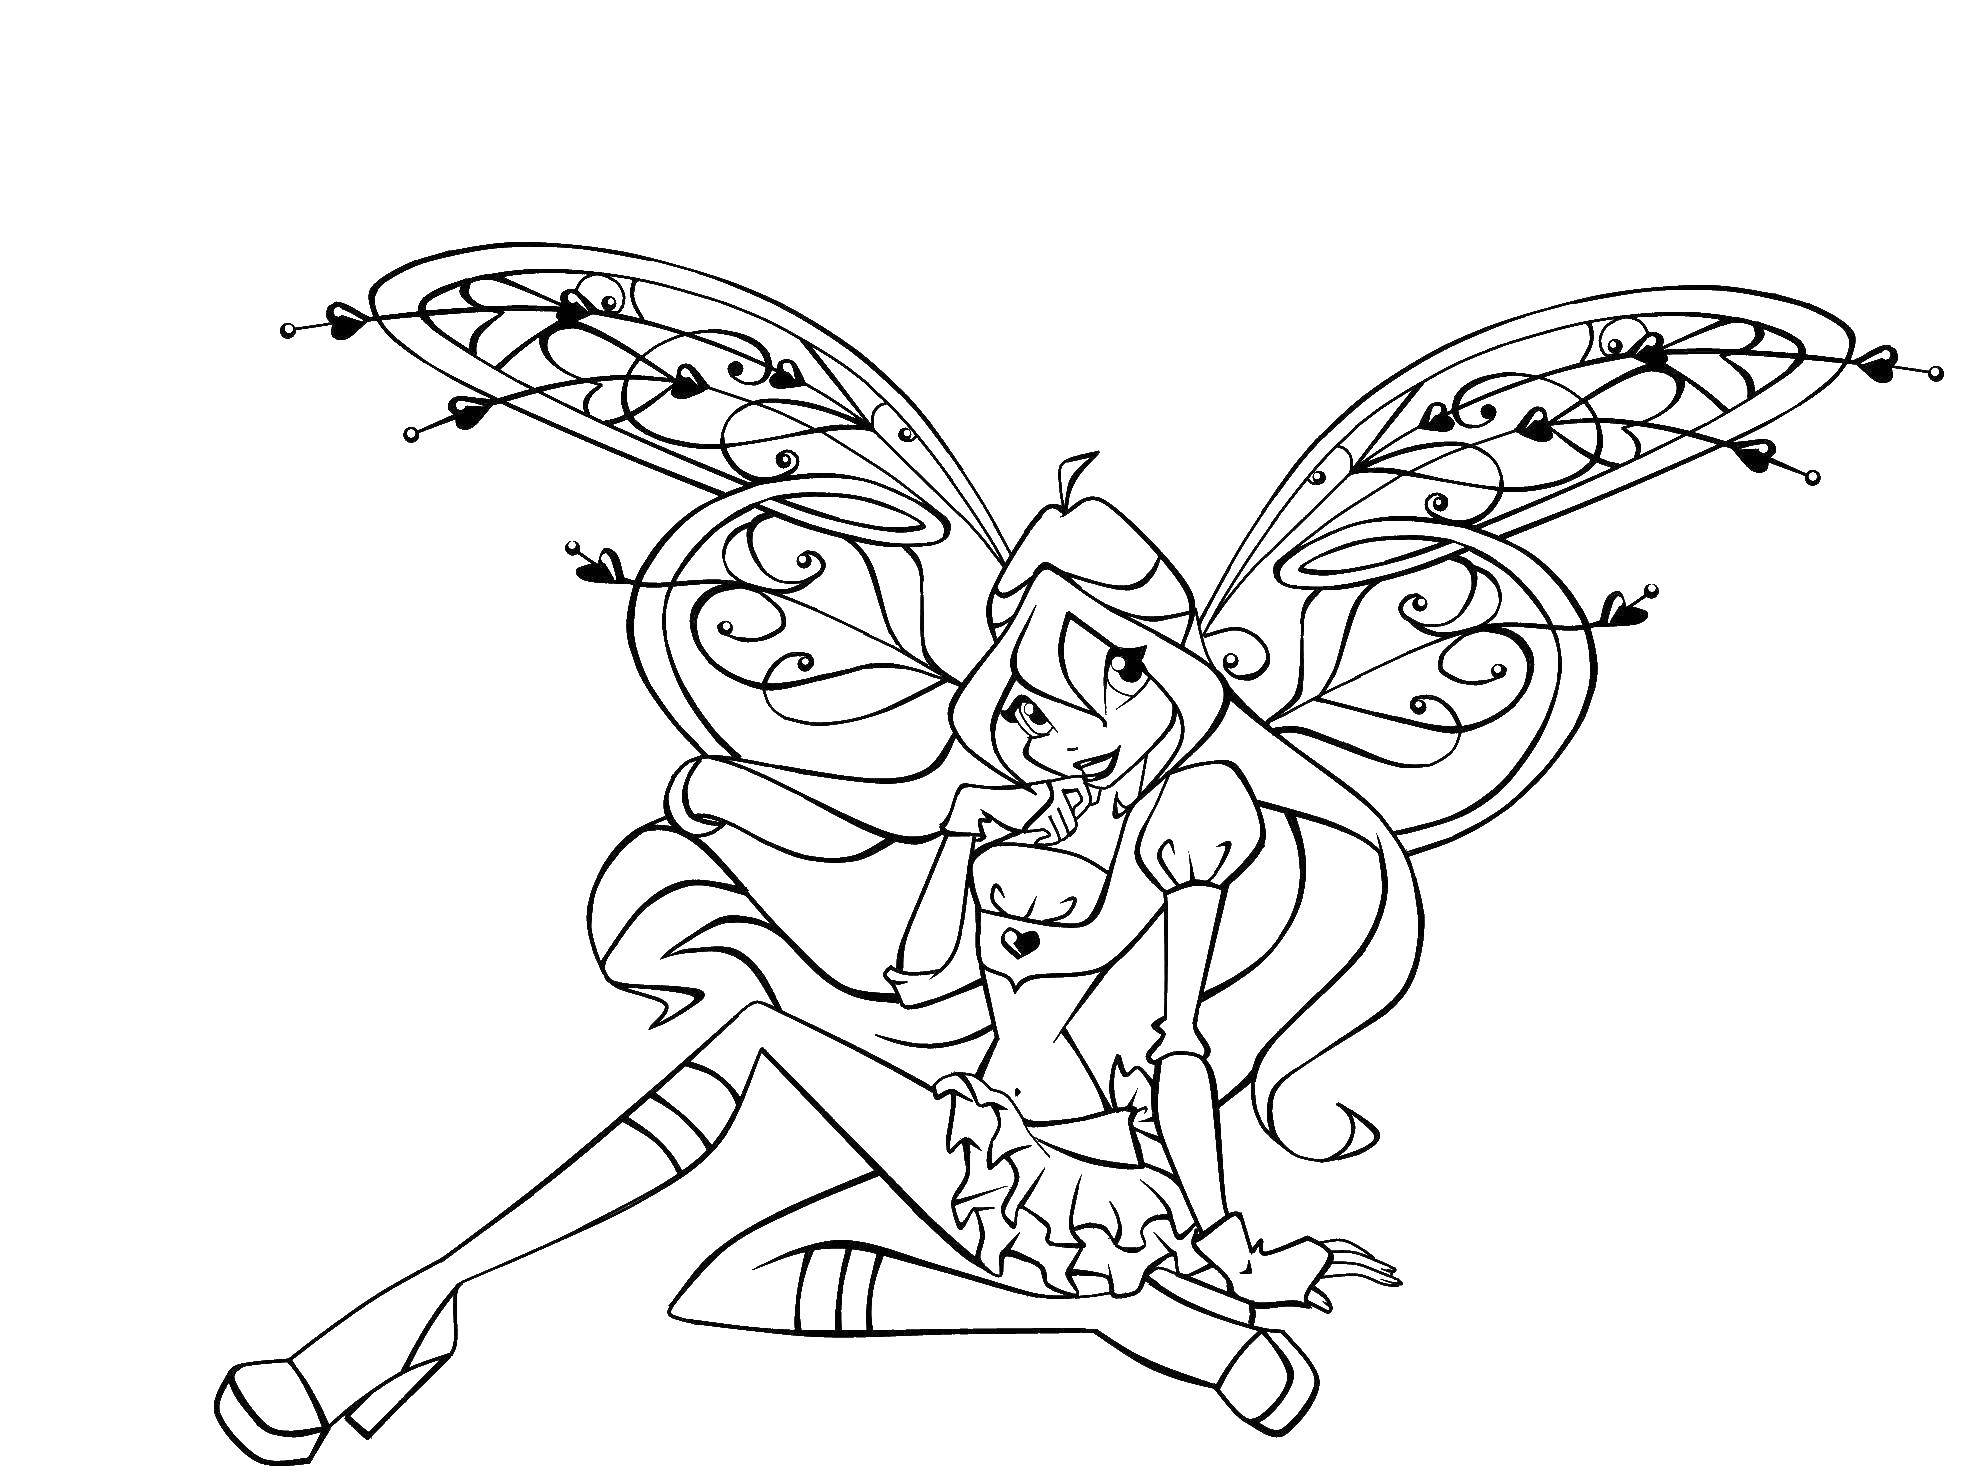 Coloring Winx fairies. Category Winx. Tags:  fairies, the winx girls.